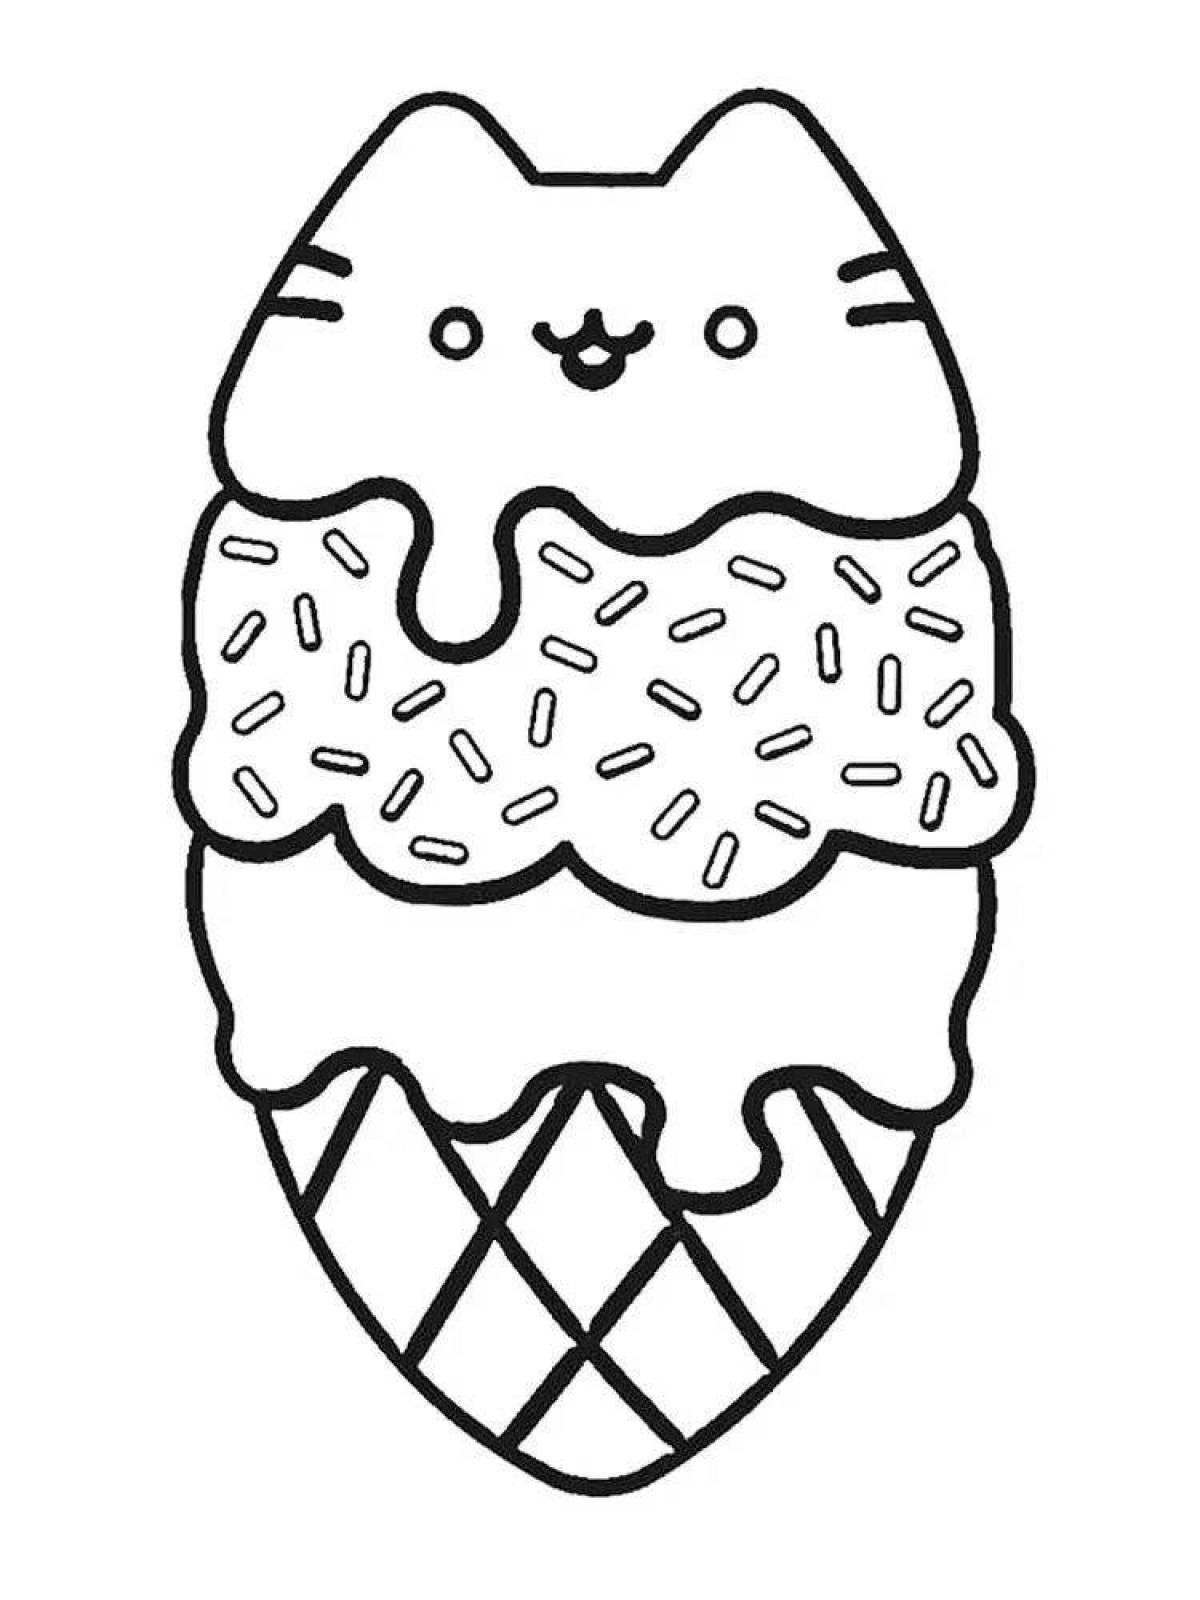 Coloring page adorable pusheen cat